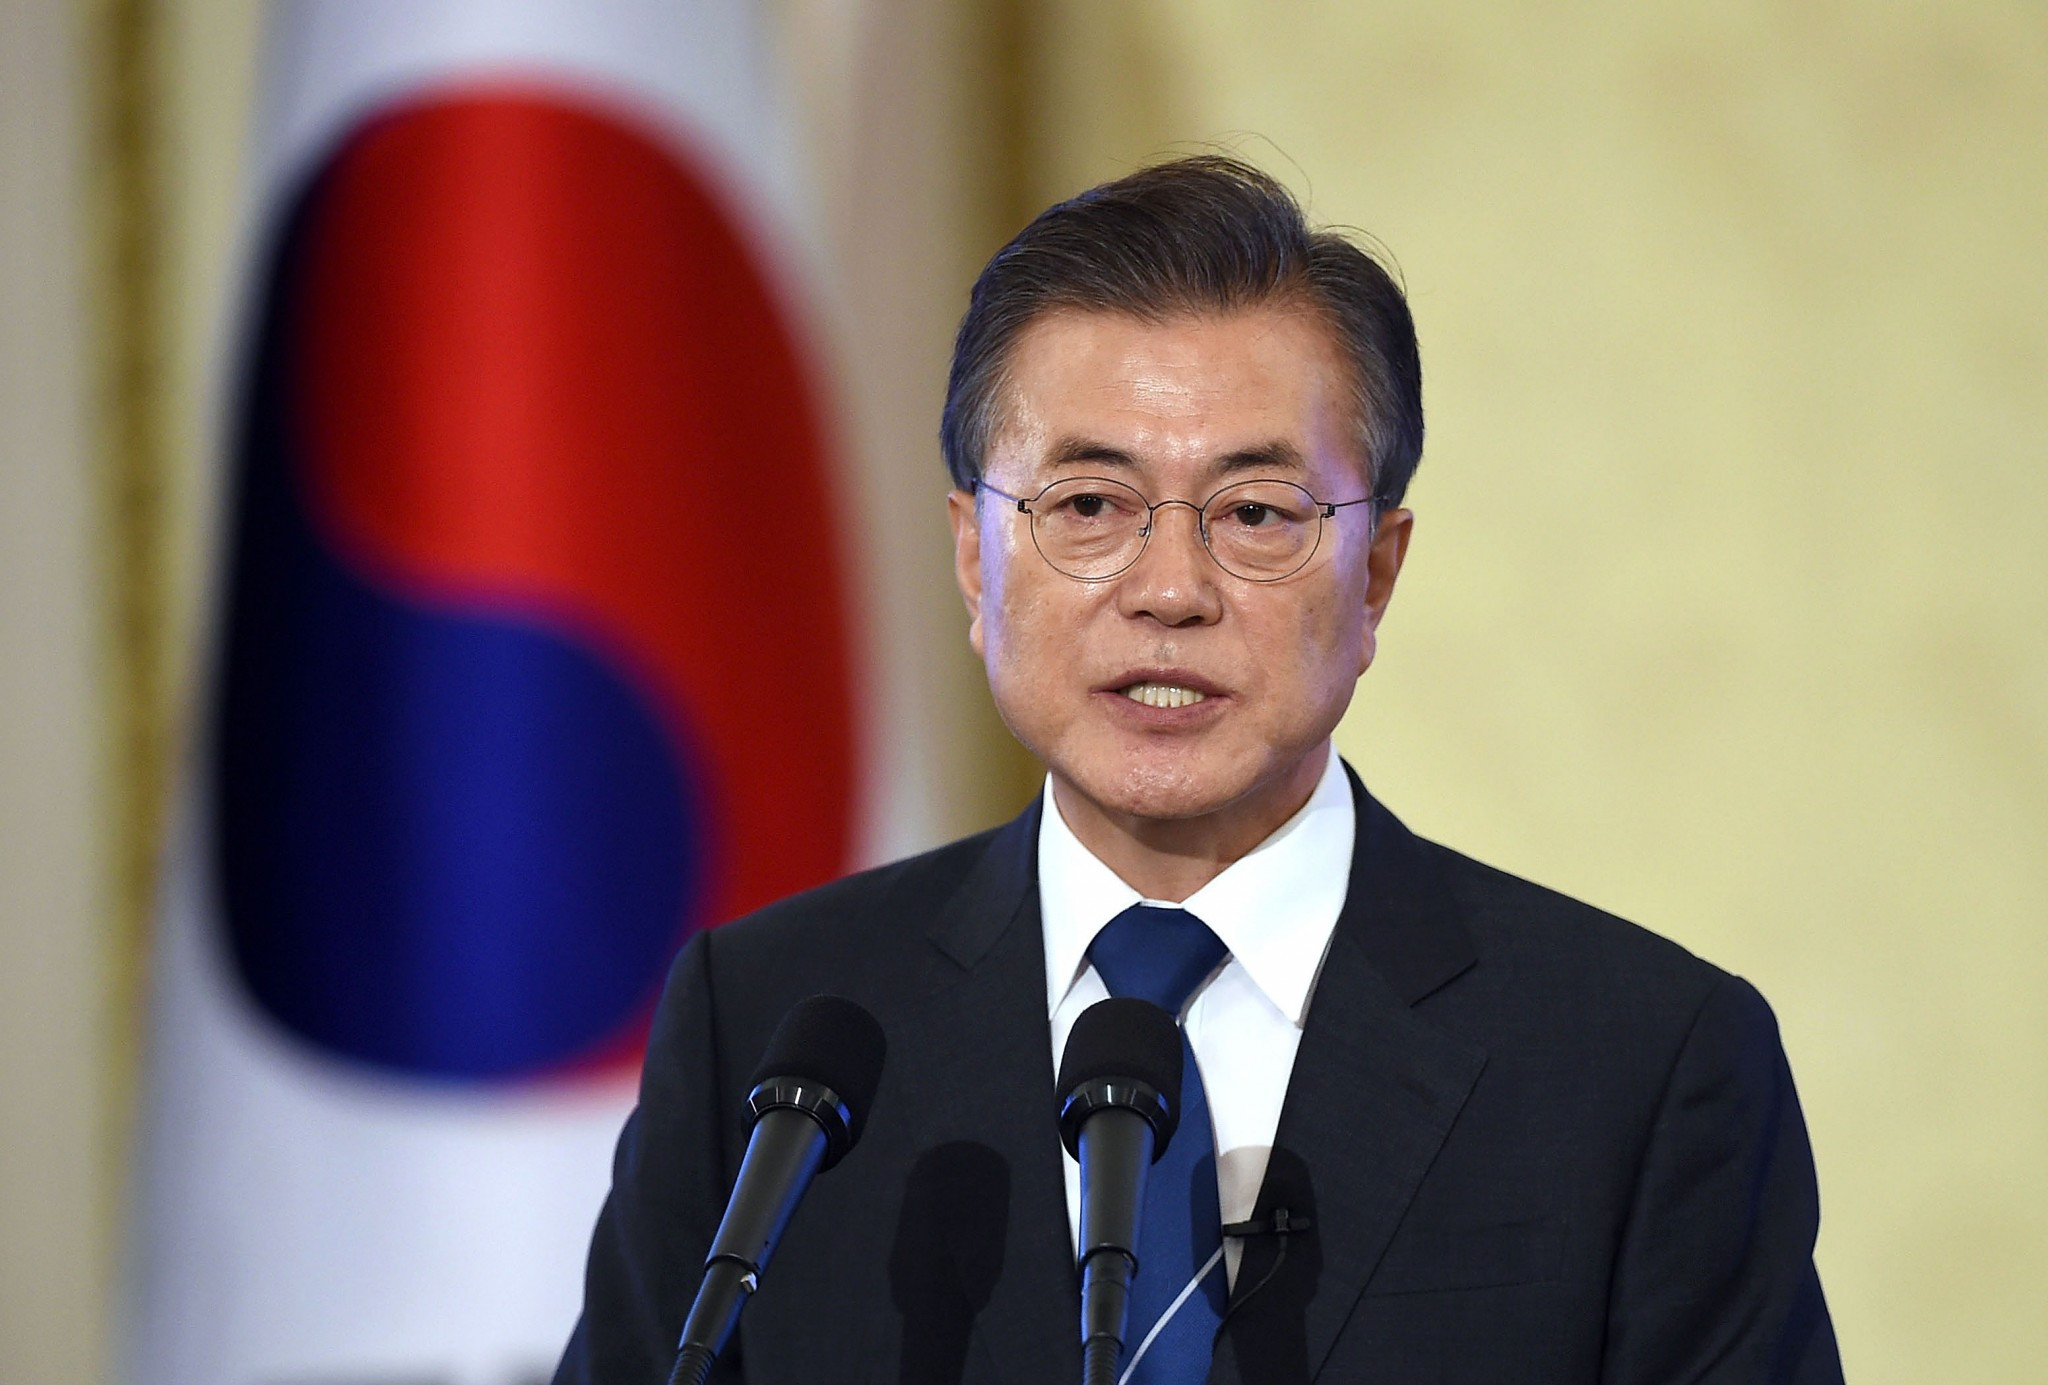 South Korea President to meet Bach at United Nations General Assembly